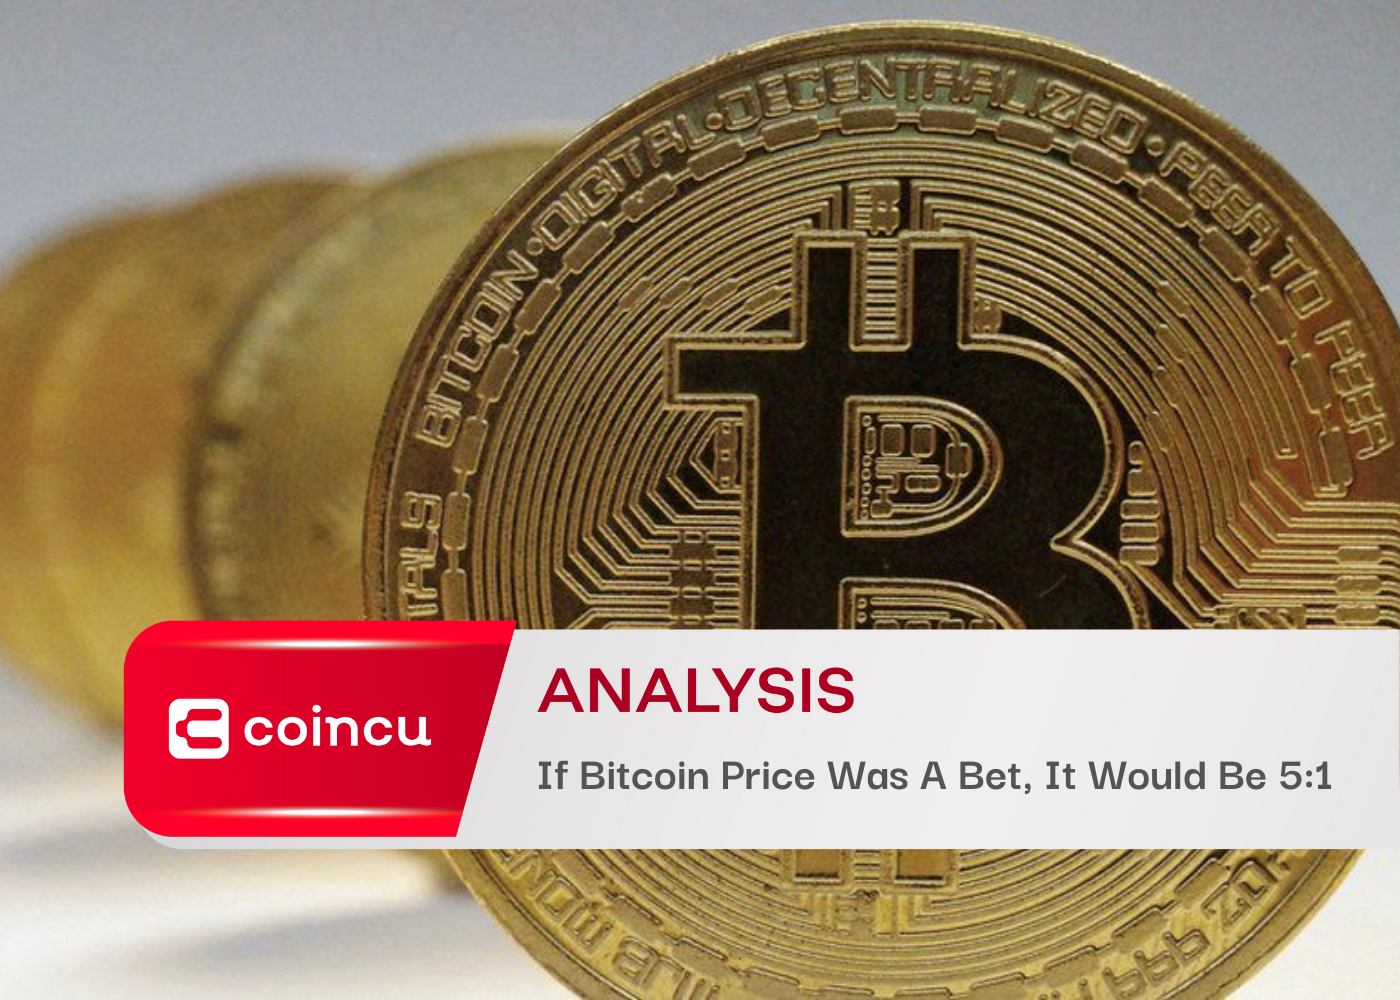 If Bitcoin Price Was A Bet, It Would Be 5:1